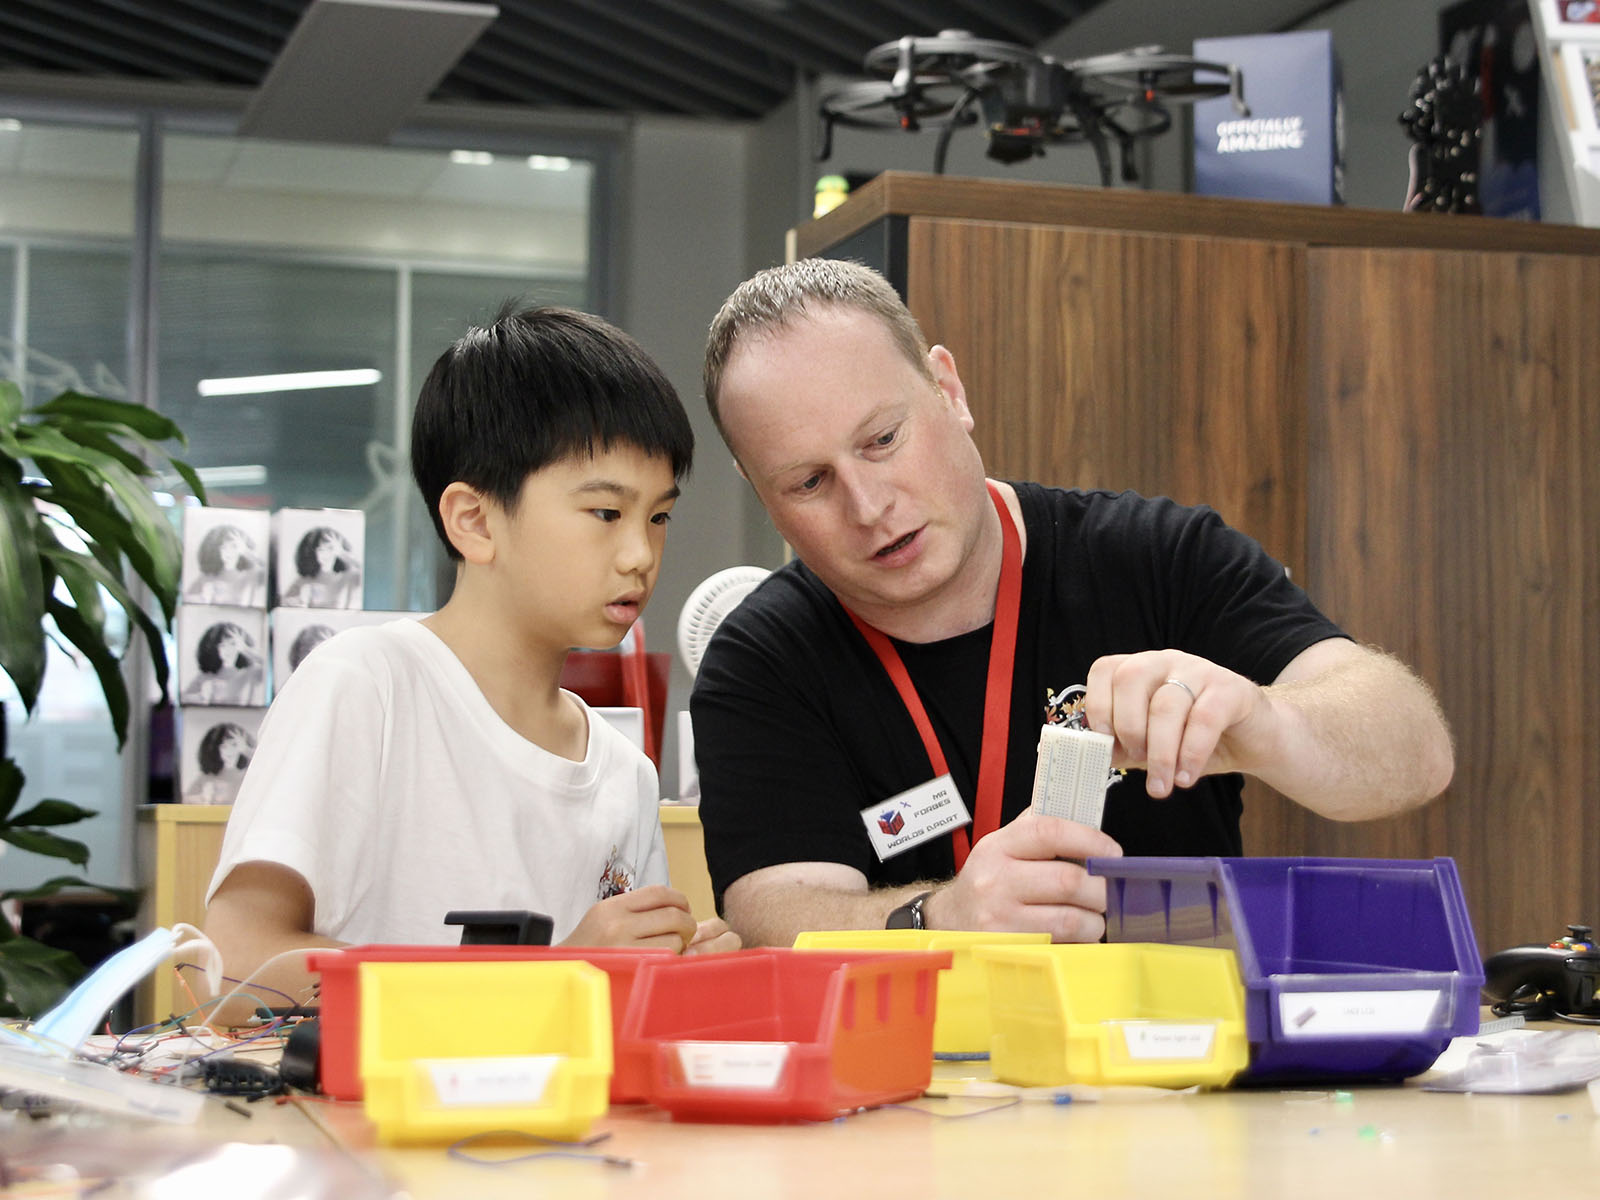 Head of Computer Science Paul Forbes works with student in a HakD workshop